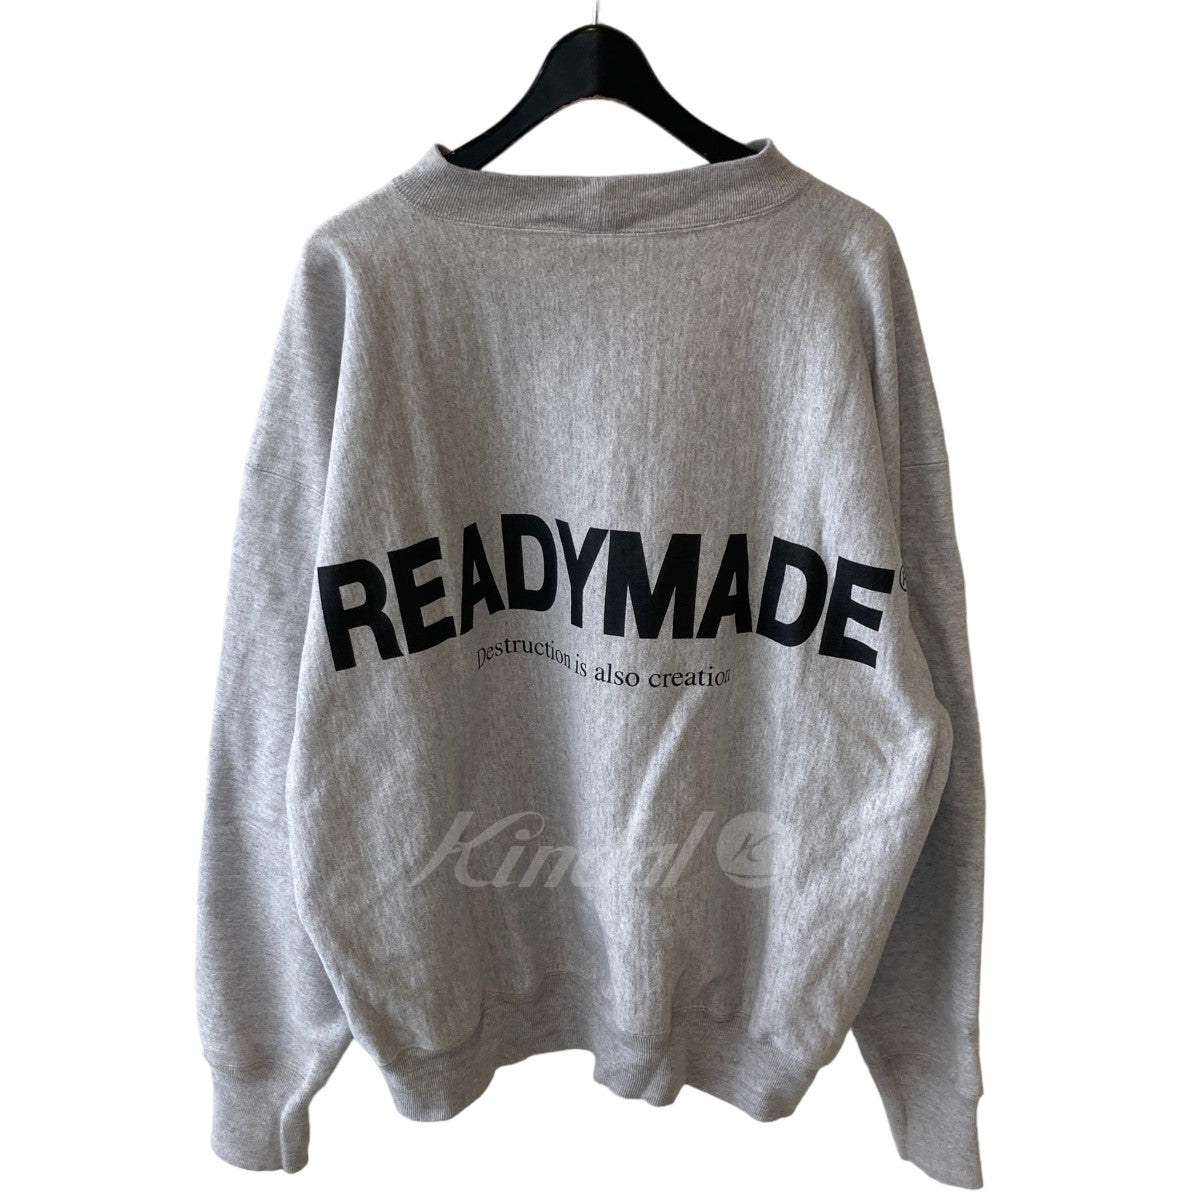 READYMADE(レディメイド) 23AW M-NECK SWT SMILE RE-CO-BK-00-00-246 ...